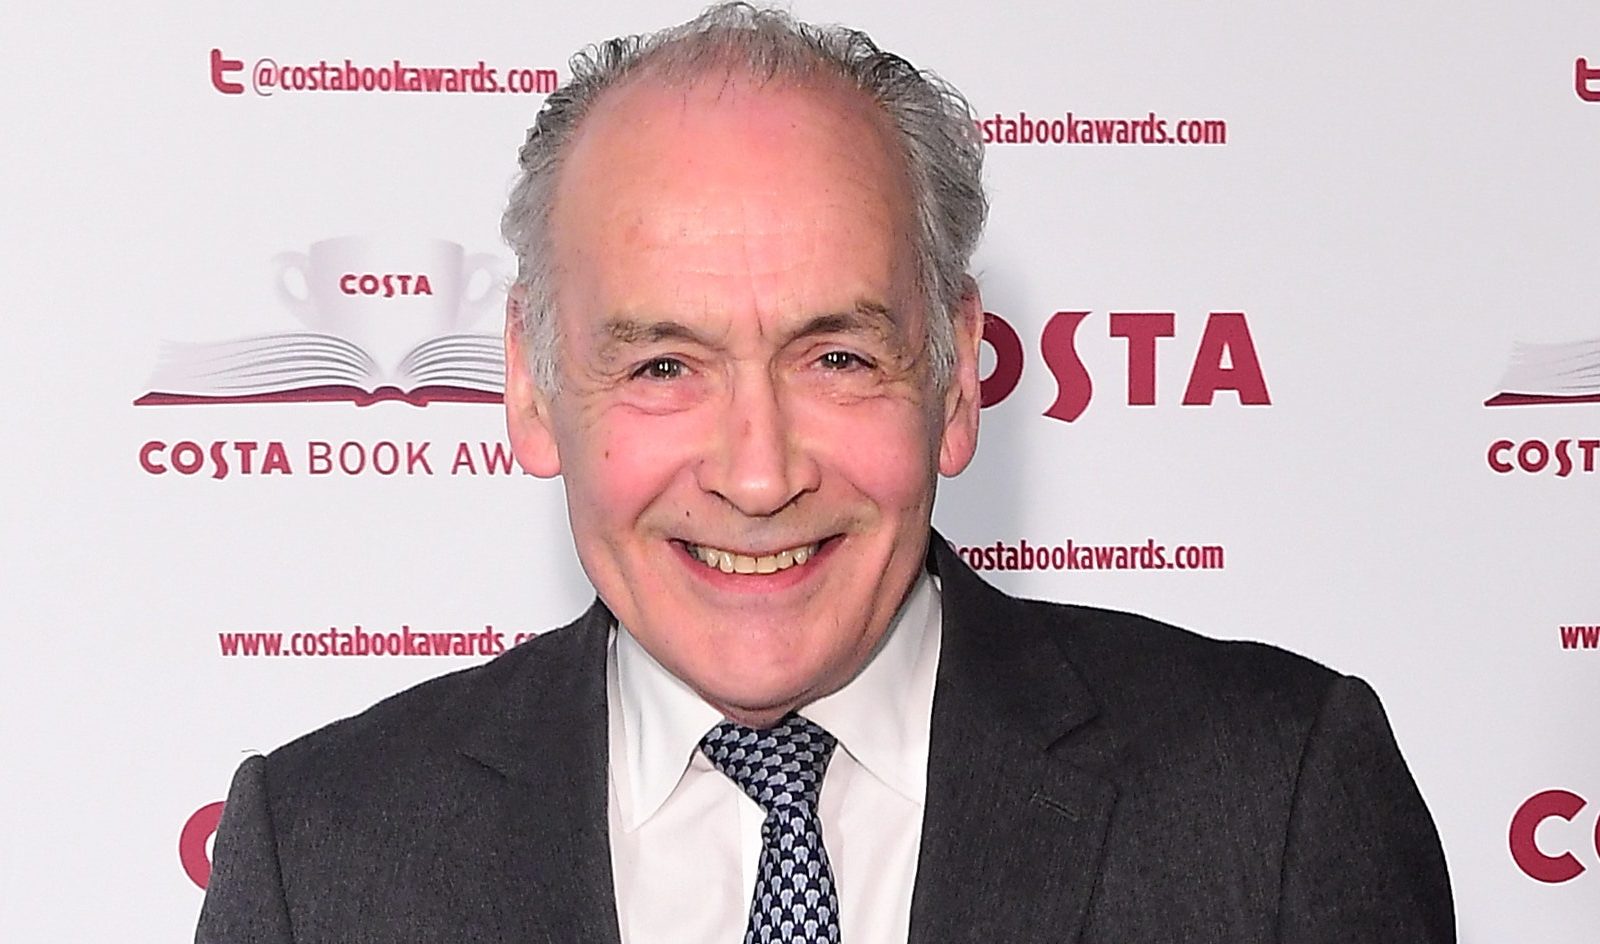 Alastair Stewart is out as an ITV presenter after a row on Twitter